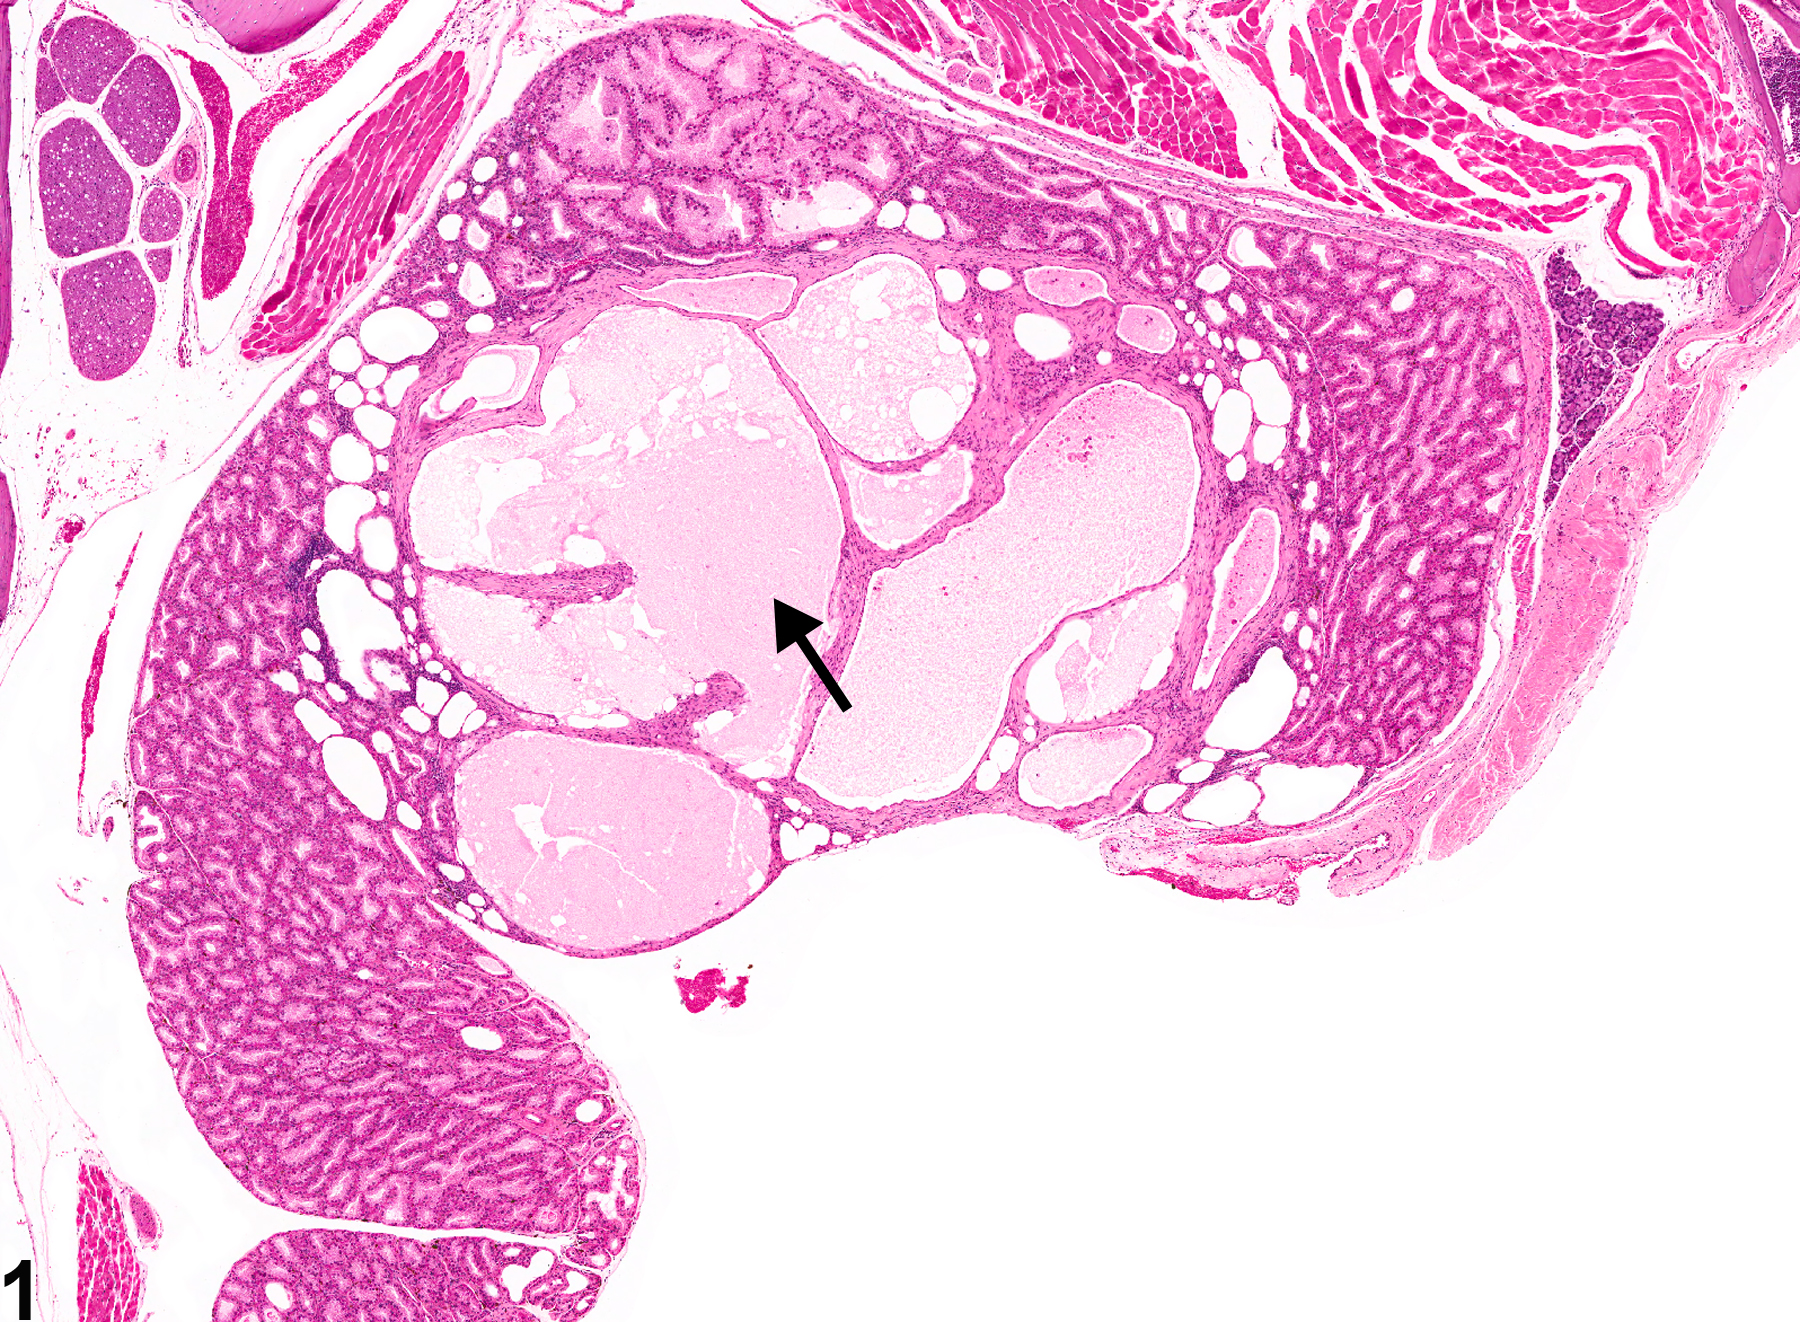 Image of cyst in the Harderian gland from a male B6C3F1 mouse in a chronic study